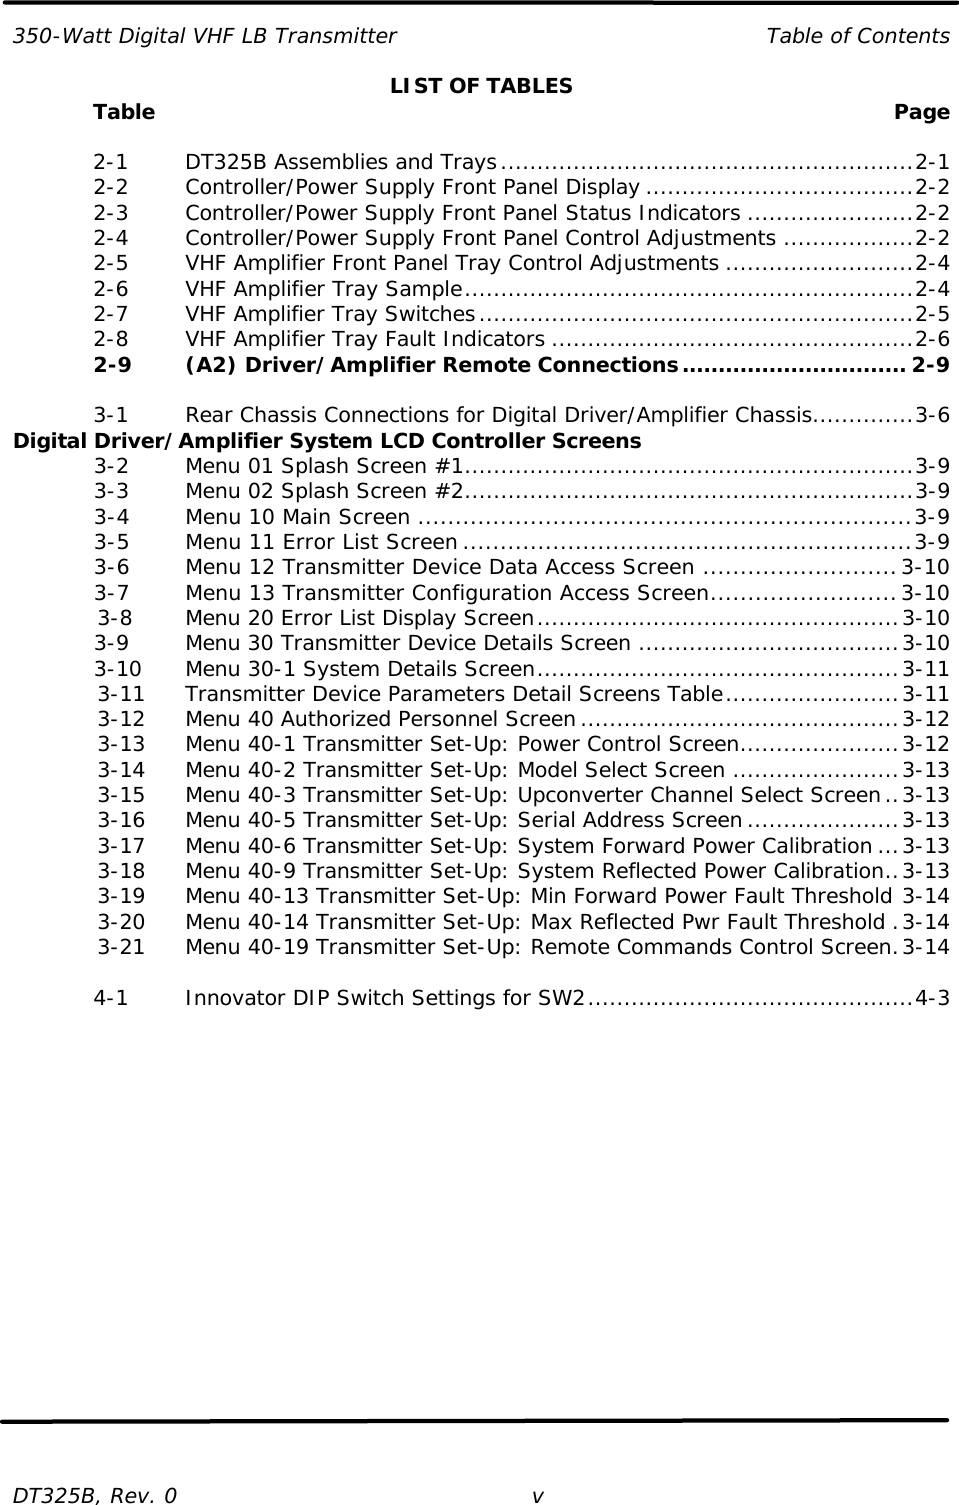 350-Watt Digital VHF LB Transmitter Table of Contents  DT325B, Rev. 0 v LIST OF TABLES  Table    Page   2-1   DT325B Assemblies and Trays.........................................................2-1  2-2   Controller/Power Supply Front Panel Display .....................................2-2  2-3   Controller/Power Supply Front Panel Status Indicators .......................2-2  2-4   Controller/Power Supply Front Panel Control Adjustments ..................2-2  2-5   VHF Amplifier Front Panel Tray Control Adjustments ..........................2-4  2-6   VHF Amplifier Tray Sample..............................................................2-4  2-7   VHF Amplifier Tray Switches............................................................2-5  2-8   VHF Amplifier Tray Fault Indicators ..................................................2-6  2-9   (A2) Driver/Amplifier Remote Connections............................... 2-9   3-1   Rear Chassis Connections for Digital Driver/Amplifier Chassis..............3-6 Digital Driver/Amplifier System LCD Controller Screens     3-2   Menu 01 Splash Screen #1..............................................................3-9     3-3   Menu 02 Splash Screen #2..............................................................3-9     3-4   Menu 10 Main Screen ..................................................................3-9     3-5   Menu 11 Error List Screen ............................................................3-9     3-6   Menu 12 Transmitter Device Data Access Screen ..........................3-10     3-7   Menu 13 Transmitter Configuration Access Screen.........................3-10     3-8   Menu 20 Error List Display Screen..................................................3-10     3-9   Menu 30 Transmitter Device Details Screen ....................................3-10     3-10 Menu 30-1 System Details Screen..................................................3-11     3-11 Transmitter Device Parameters Detail Screens Table........................3-11     3-12 Menu 40 Authorized Personnel Screen............................................3-12     3-13 Menu 40-1 Transmitter Set-Up: Power Control Screen......................3-12     3-14 Menu 40-2 Transmitter Set-Up: Model Select Screen .......................3-13     3-15 Menu 40-3 Transmitter Set-Up: Upconverter Channel Select Screen..3-13     3-16 Menu 40-5 Transmitter Set-Up: Serial Address Screen .....................3-13     3-17 Menu 40-6 Transmitter Set-Up: System Forward Power Calibration ...3-13     3-18 Menu 40-9 Transmitter Set-Up: System Reflected Power Calibration..3-13     3-19 Menu 40-13 Transmitter Set-Up: Min Forward Power Fault Threshold 3-14     3-20 Menu 40-14 Transmitter Set-Up: Max Reflected Pwr Fault Threshold .3-14     3-21 Menu 40-19 Transmitter Set-Up: Remote Commands Control Screen.3-14   4-1   Innovator DIP Switch Settings for SW2.............................................4-3      